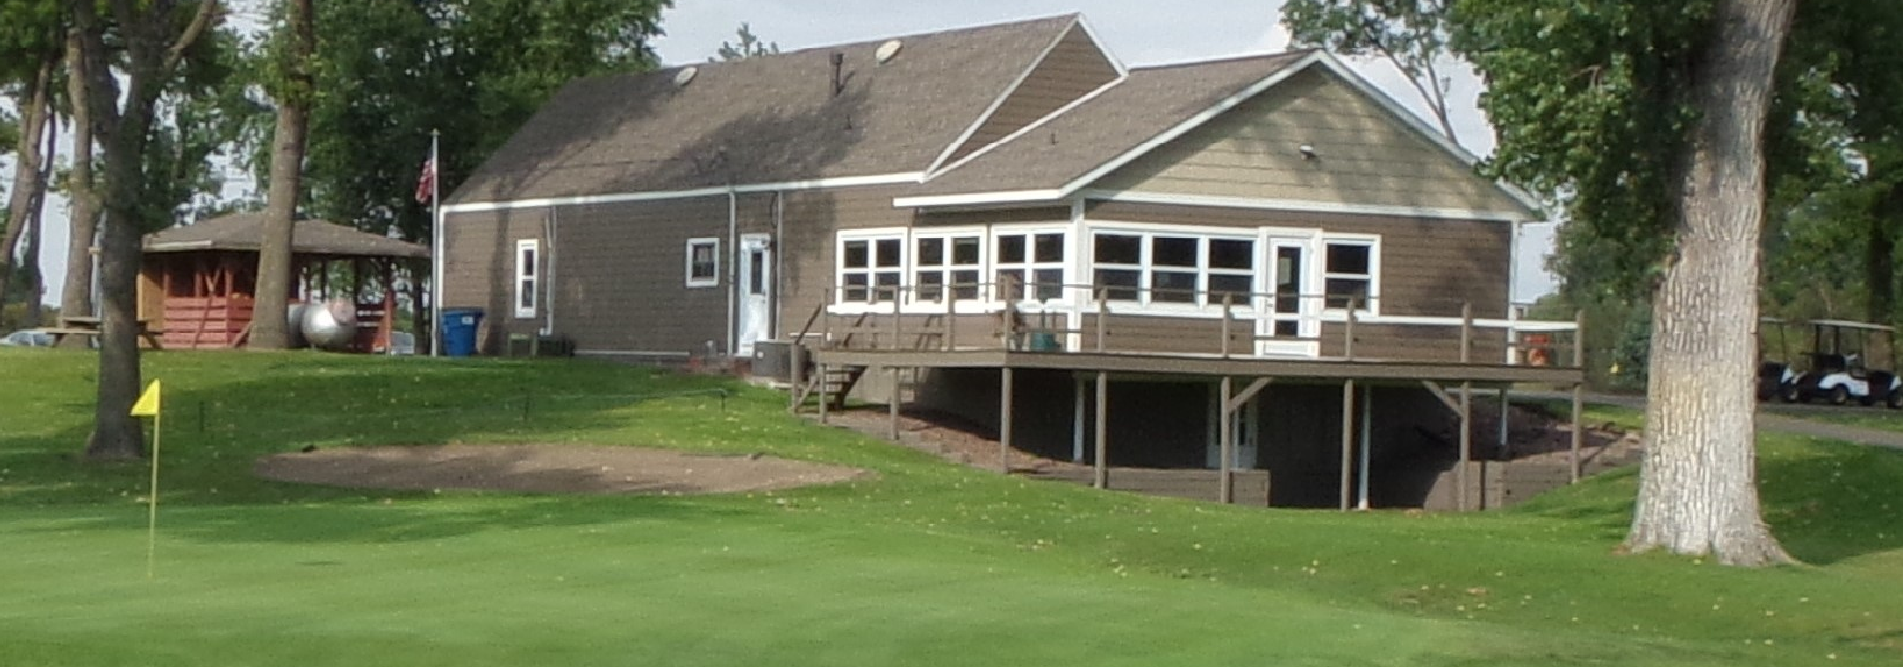 View of Winthrop Golf Club house from 9th hole green. Shows deck overlooking the 9th green.